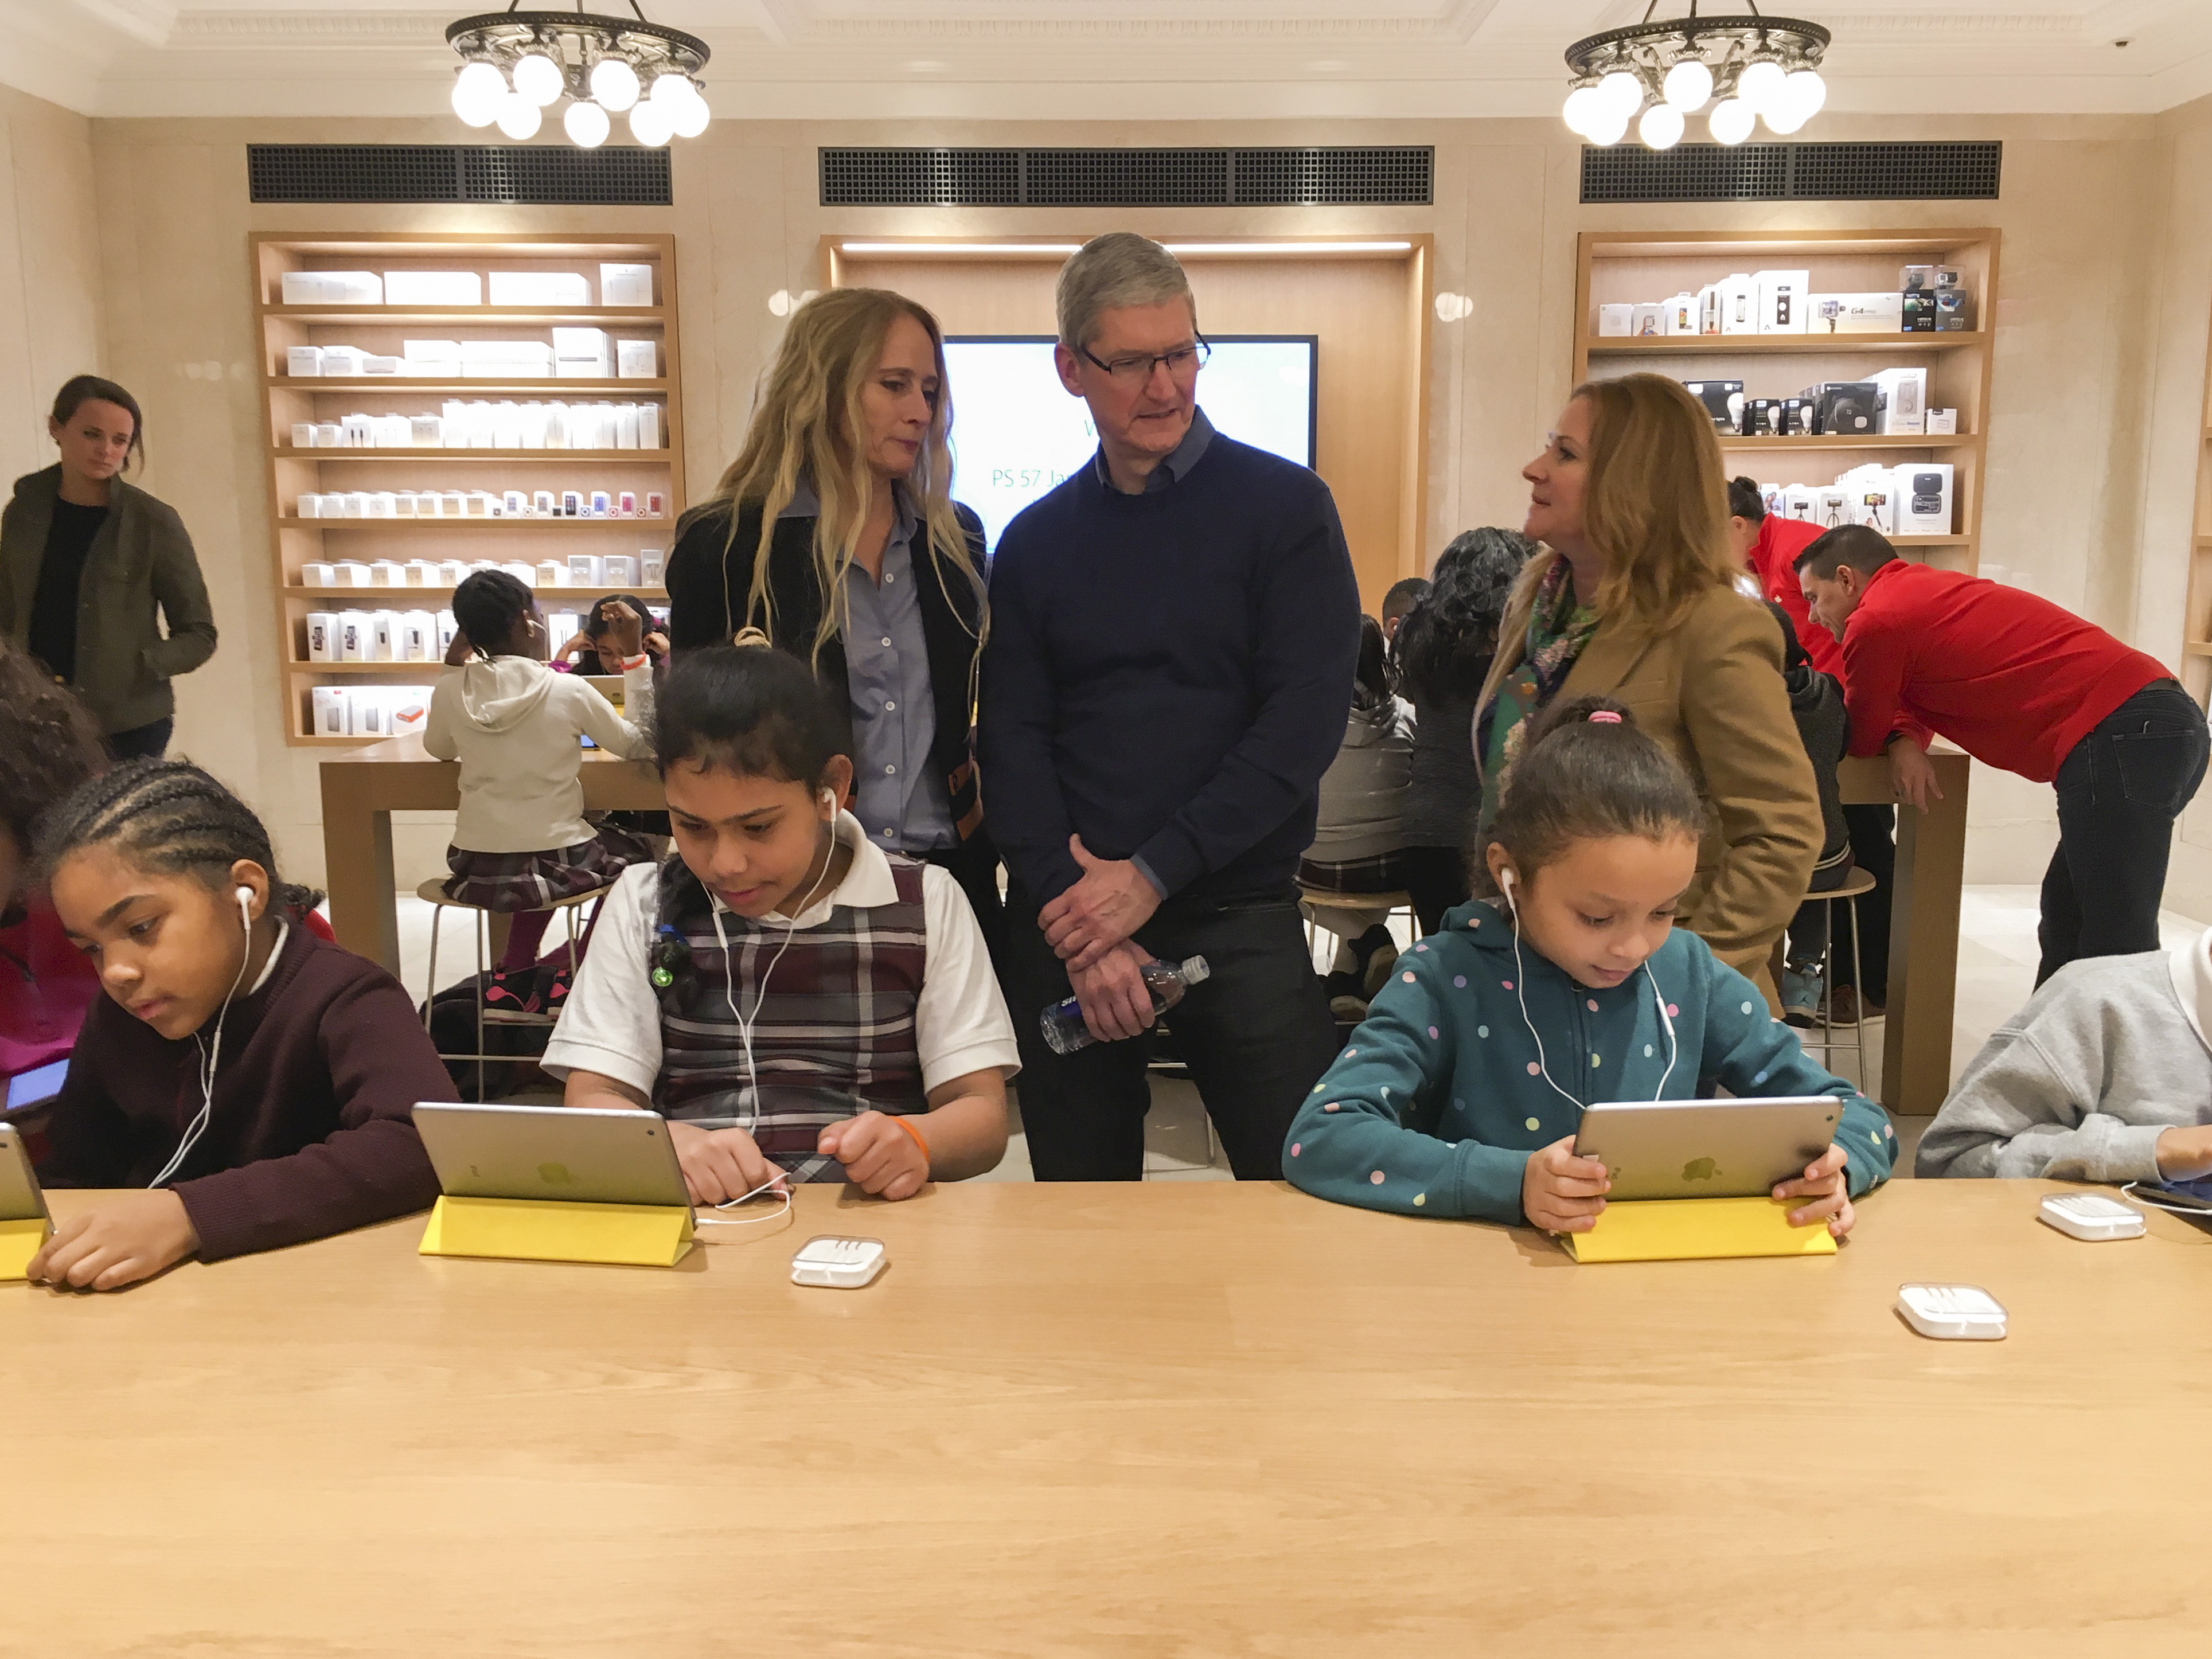 Apple Chief Executive Officer Tim Cook (C) attends an event for students to learn to write computer code at the Apple store in the Manhattan borough of New York December 9, 2015.     REUTERS/Carlo Allegri - GF10000260390